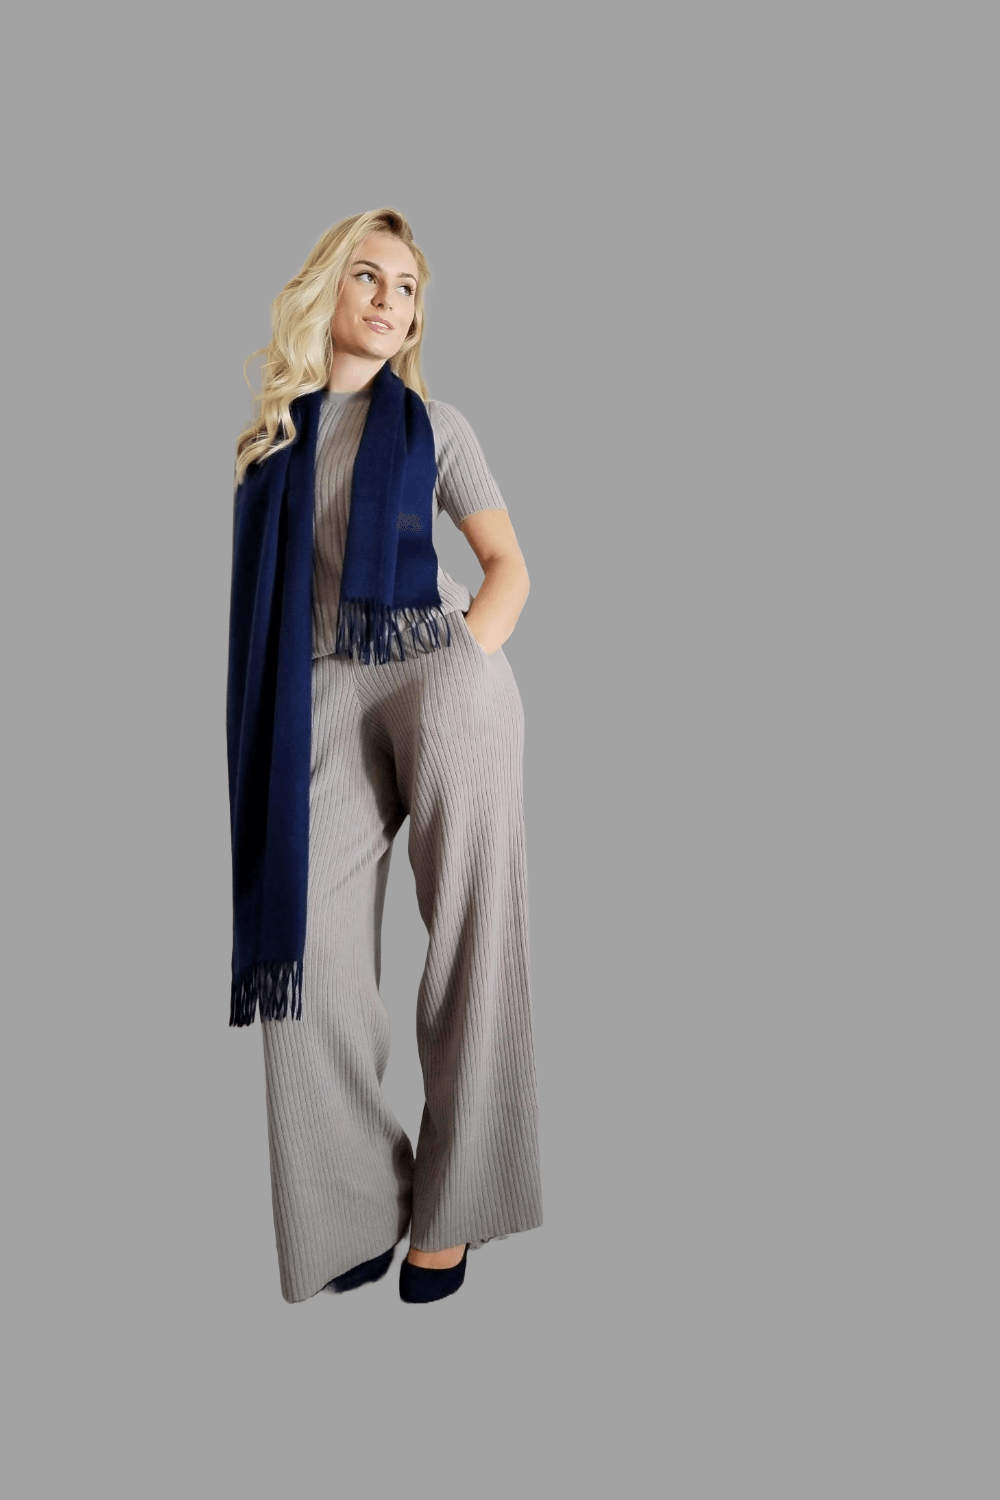 100% Cashmere Scarf in Navy Blue